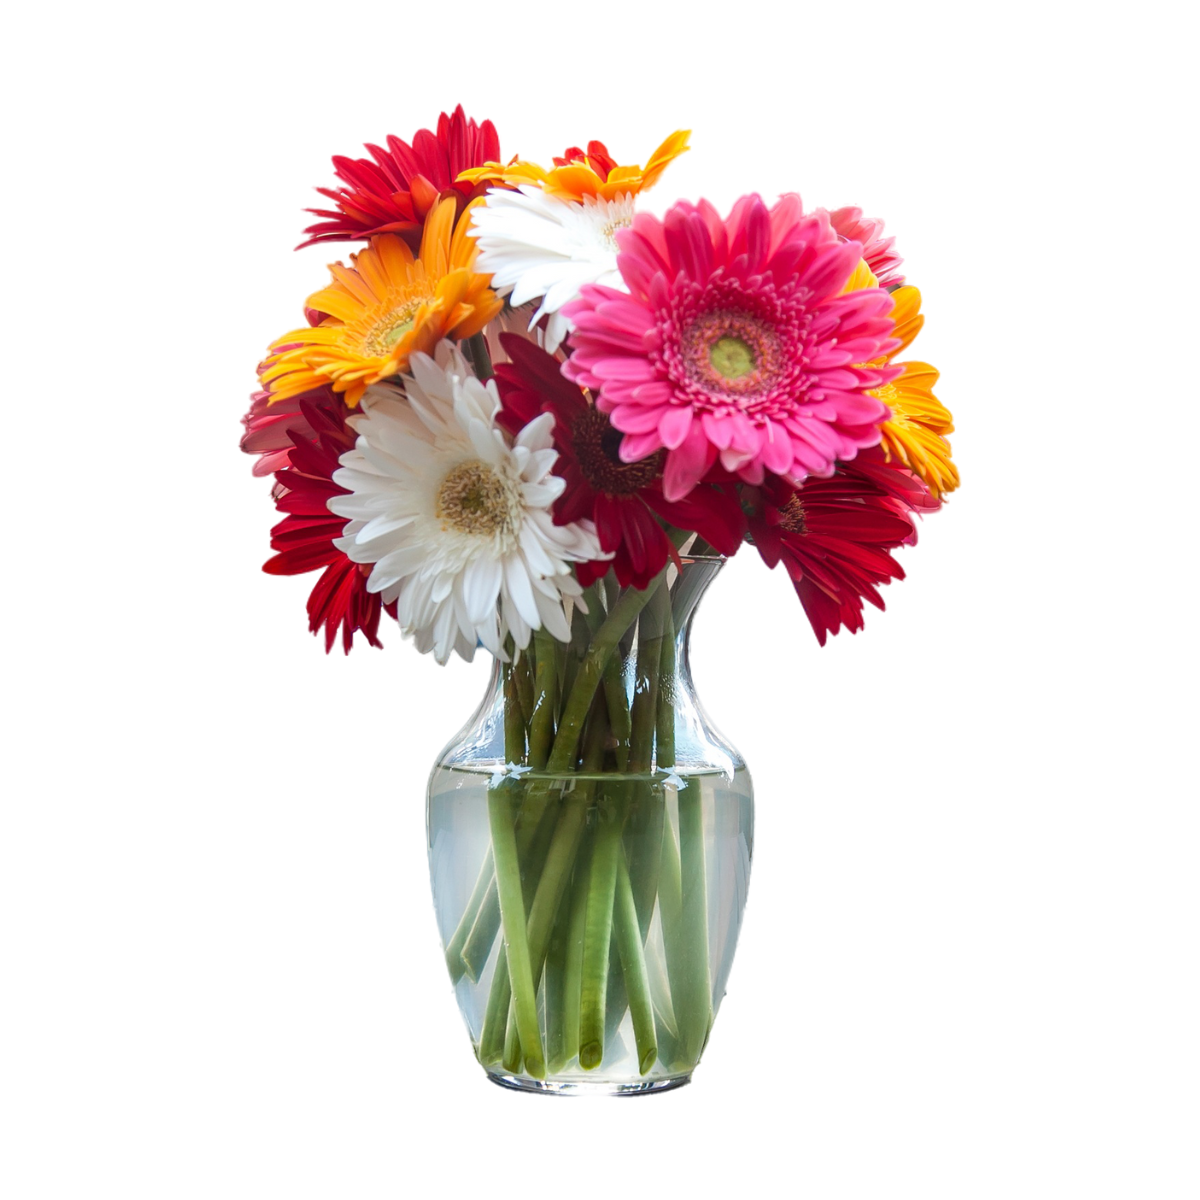 29. Spark Romance with a Stunning Crystal Vase and Fresh Flowers for 7th Anniversary